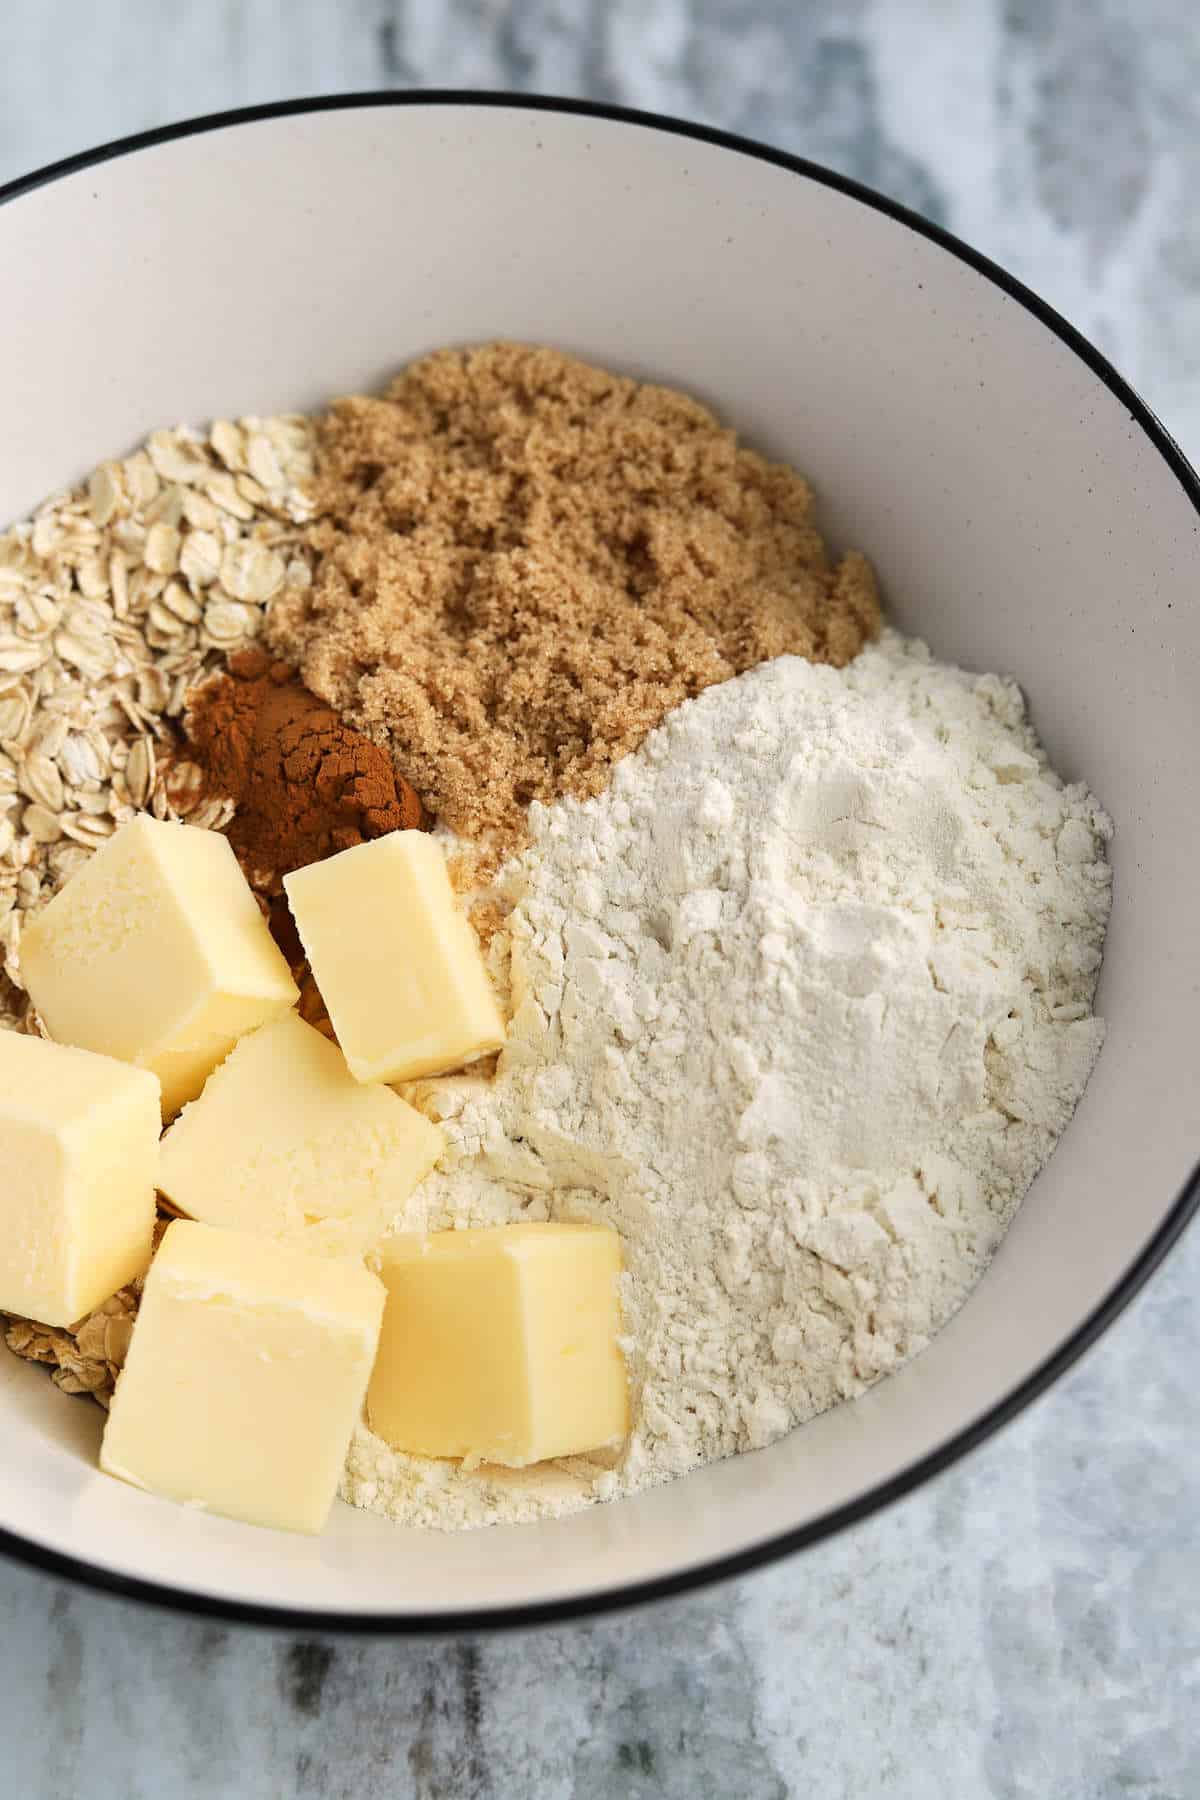 bowl of oat crumble ingredients with cold butter, flour, brown sugar, oats, and cinnamon